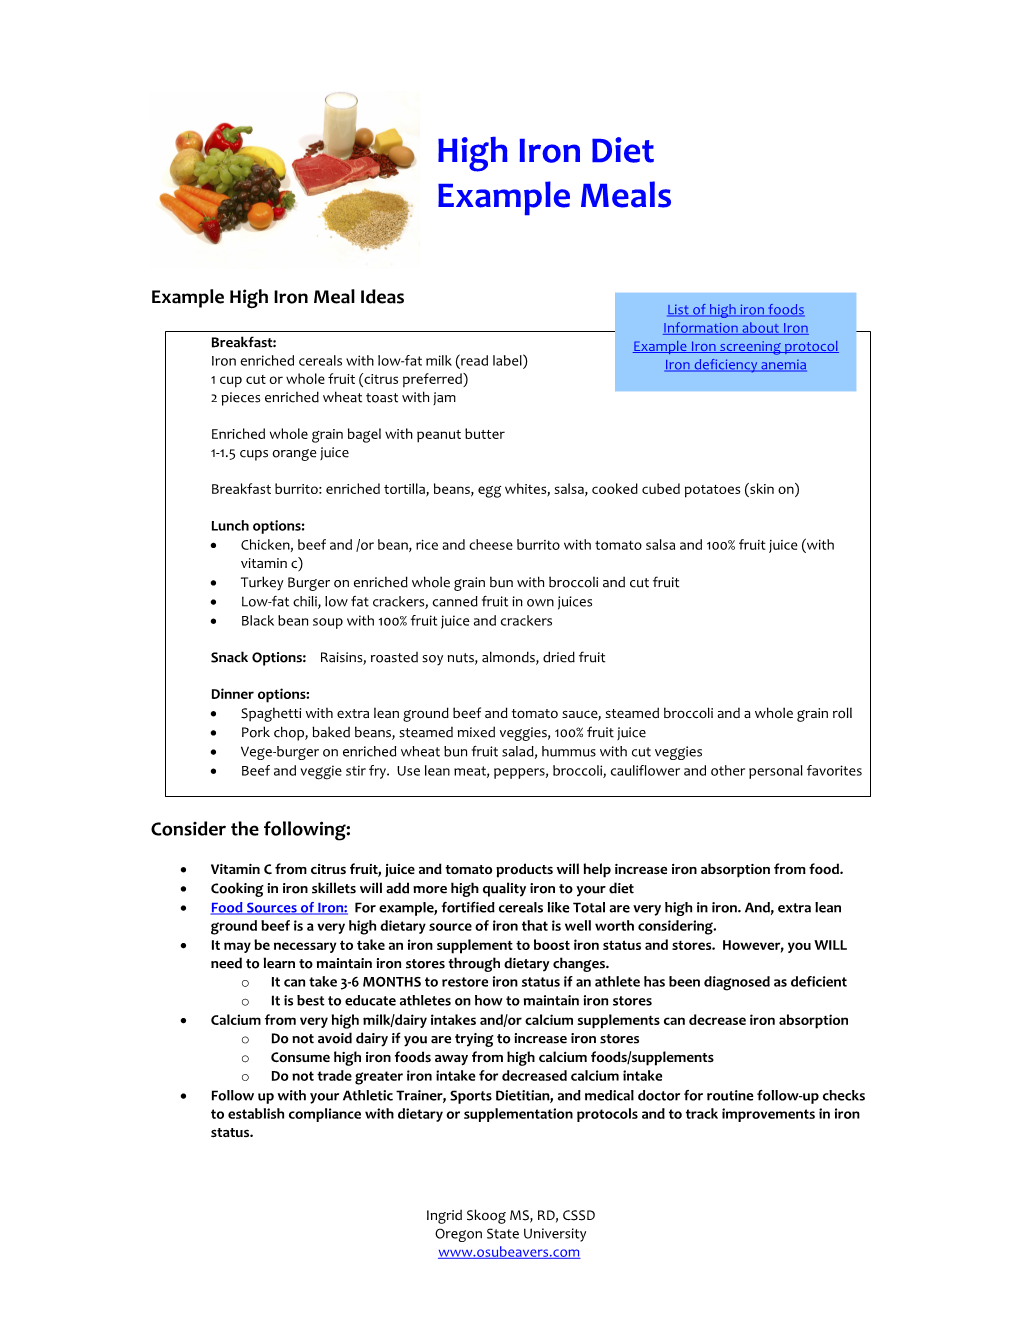 High Iron Diet: Example Meals